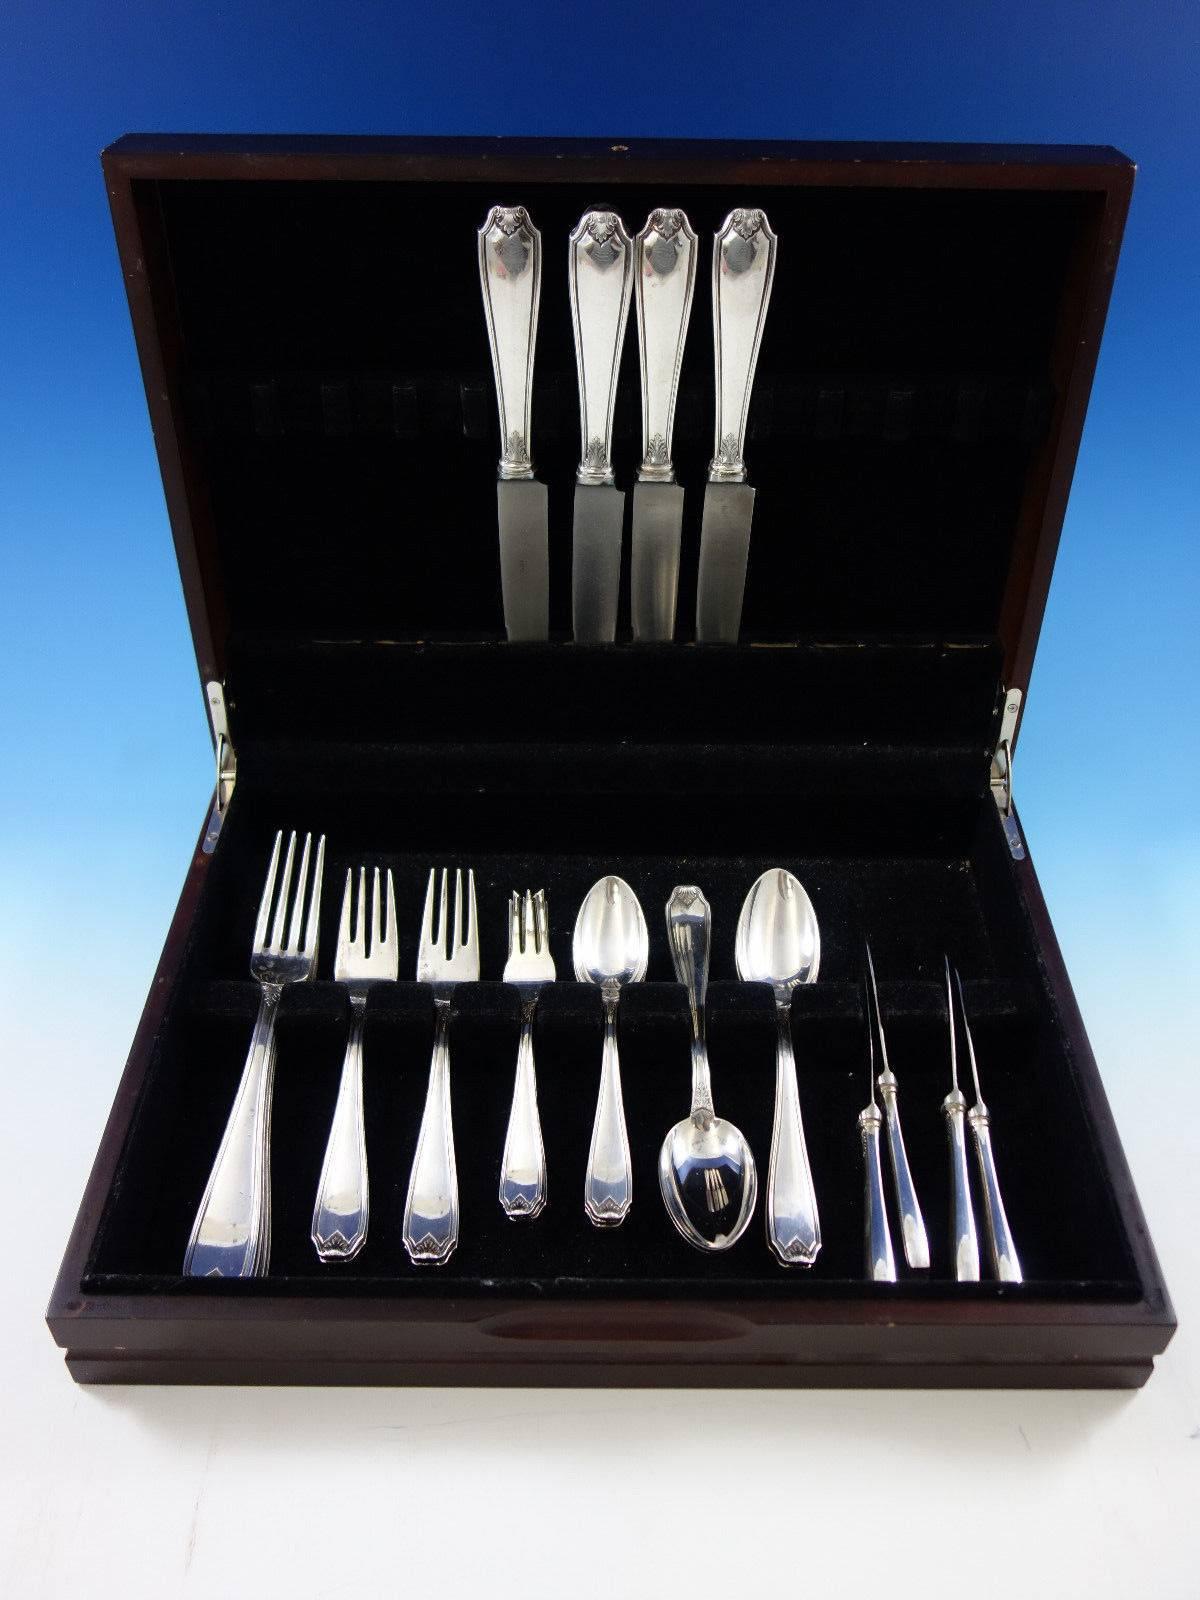 Dinner size Piedmont by Buccellati Italy silver plated flatware set of 28 pieces. This set includes: Four dinner size knives, 9 7/8", four dinner size forks, 8 1/4", four salad forks, 6 3/4", four teaspoons, 6 1/8", four place